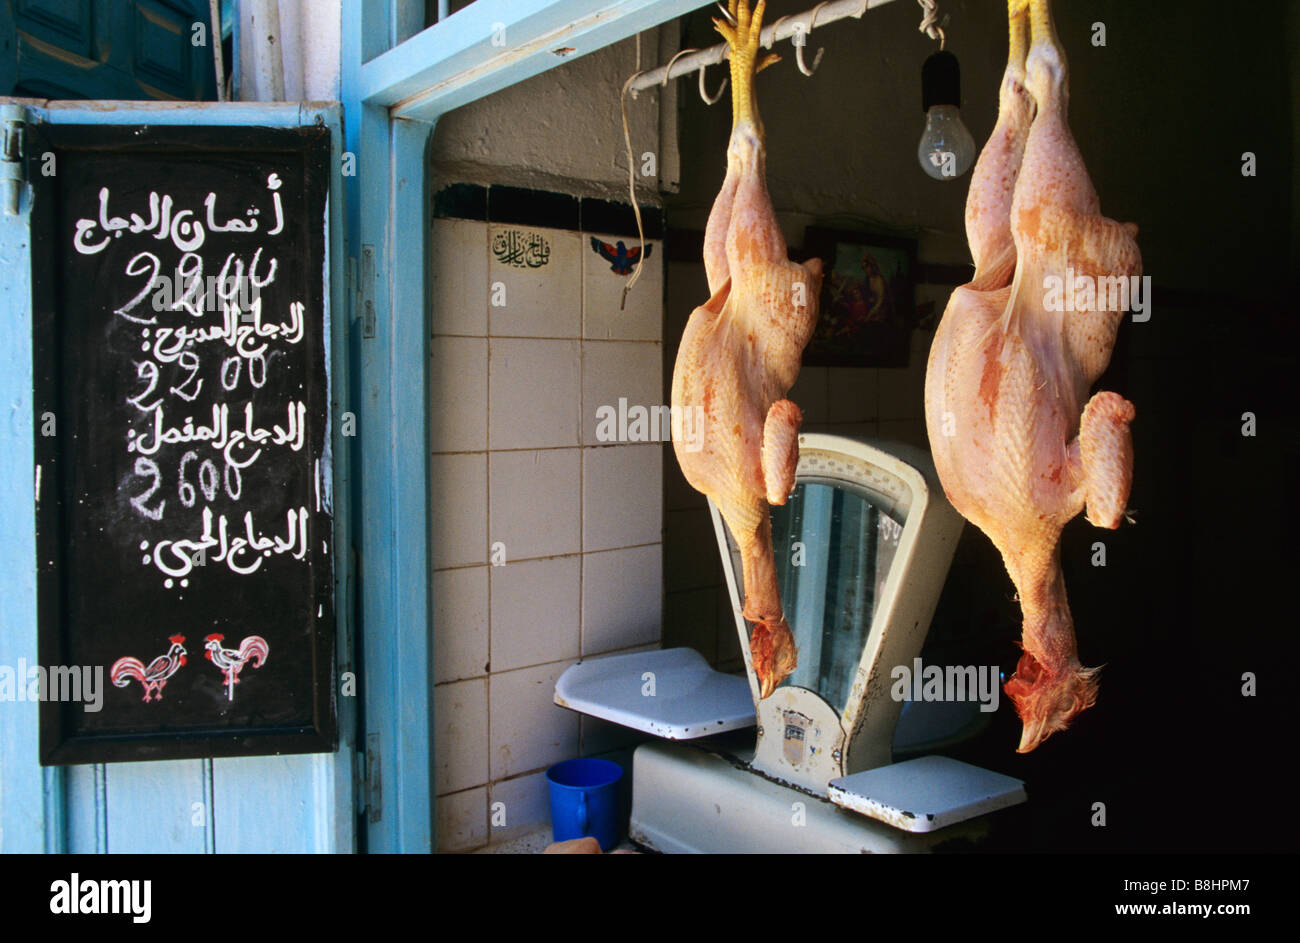 Butcher and chicken in Chefchaouen Xauen Chauem Rif Morocco Stock Photo